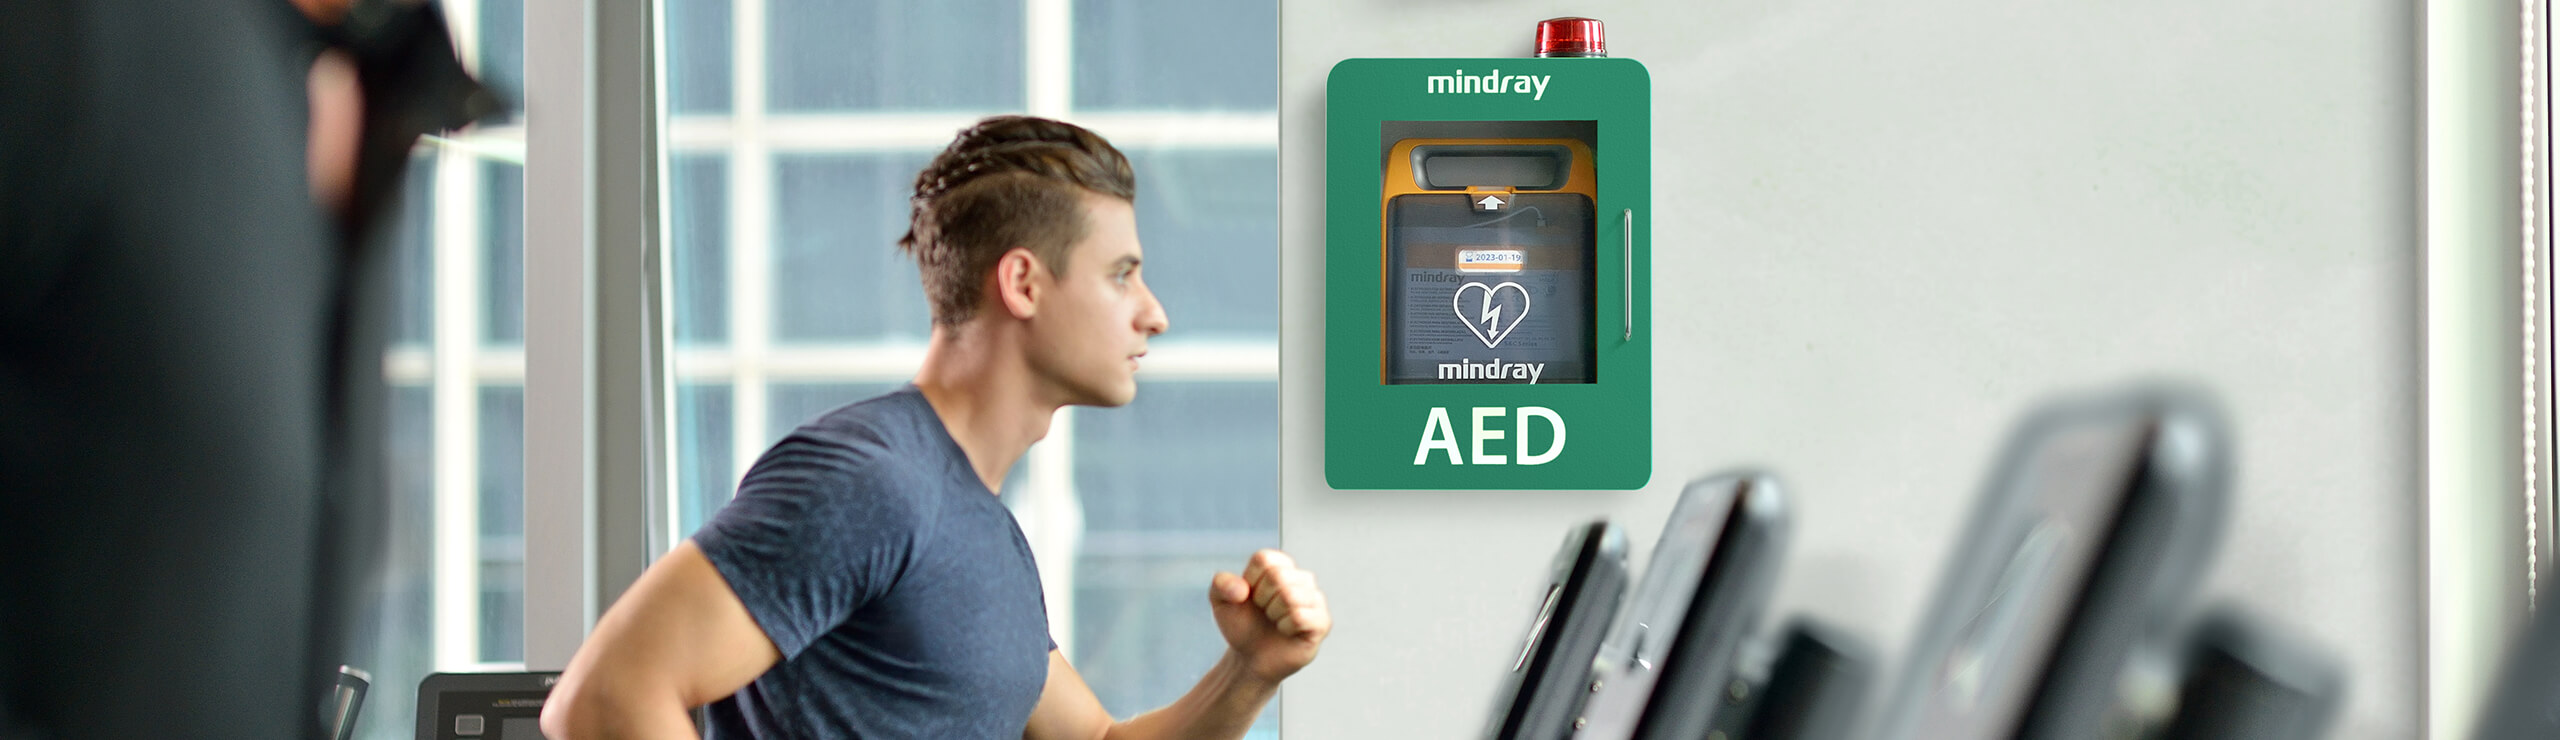 AED on wall of Gym